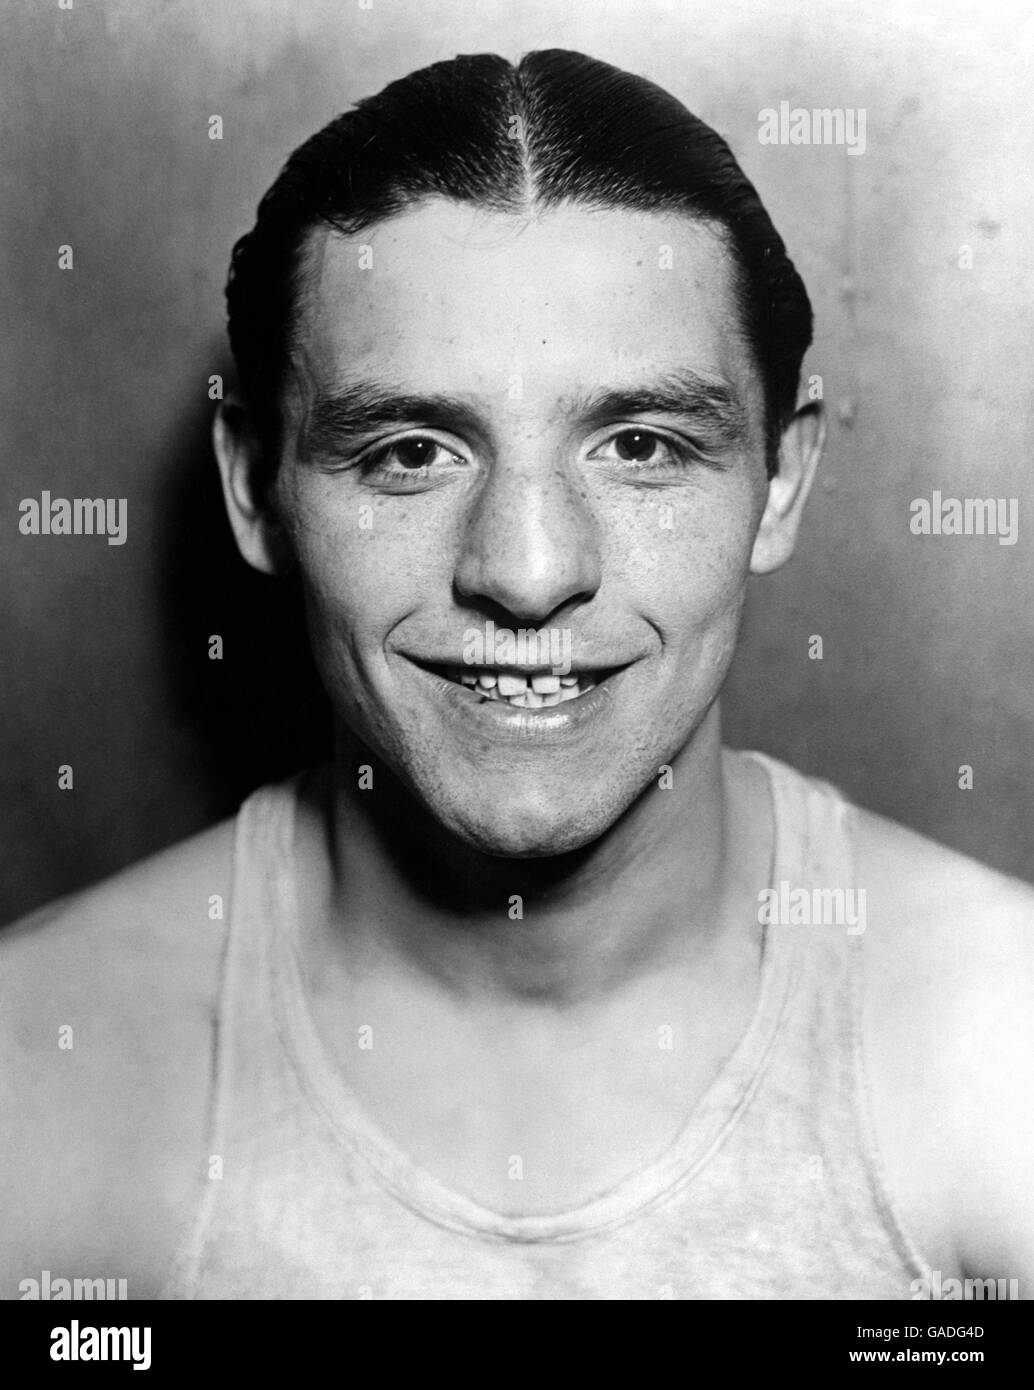 Sport - Boxing - British Boxers in the 1930's. The 'Whitechapel Whirlwind' Jack 'Kid' Berg, photographed whilst training in a New York Gym in January, 1930 Stock Photo